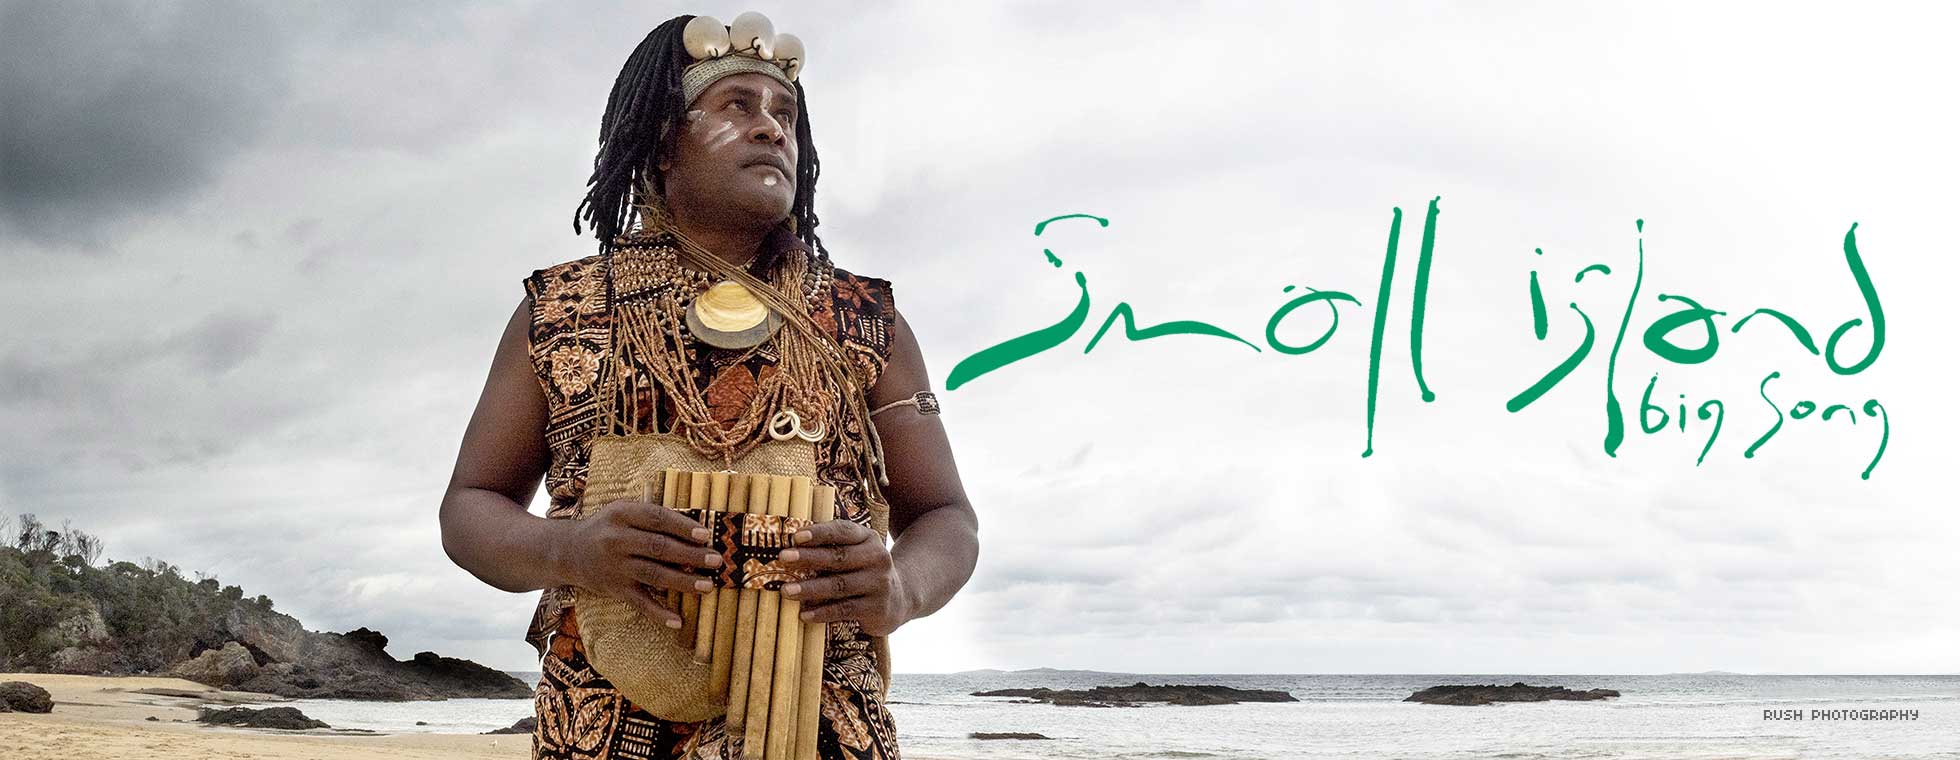 Small Island Big Song title. A musician wearing indigenous clothing holds a wind instrument while looking out at the ocean.